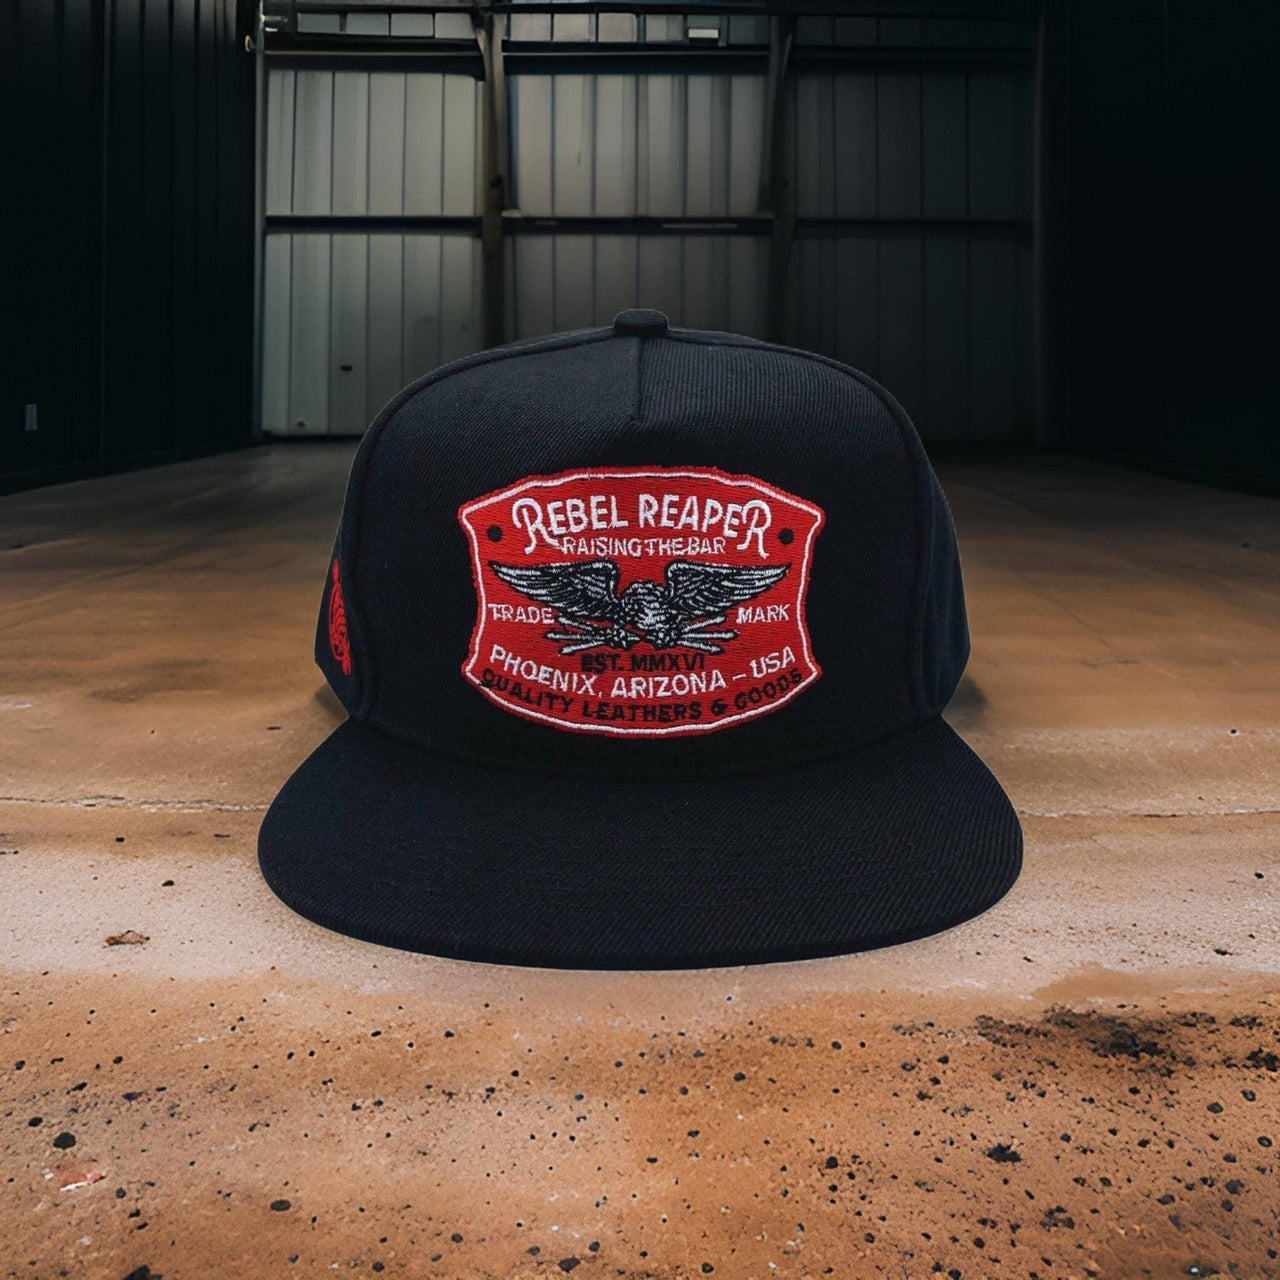 Raising the Bar Embroidered Snapback